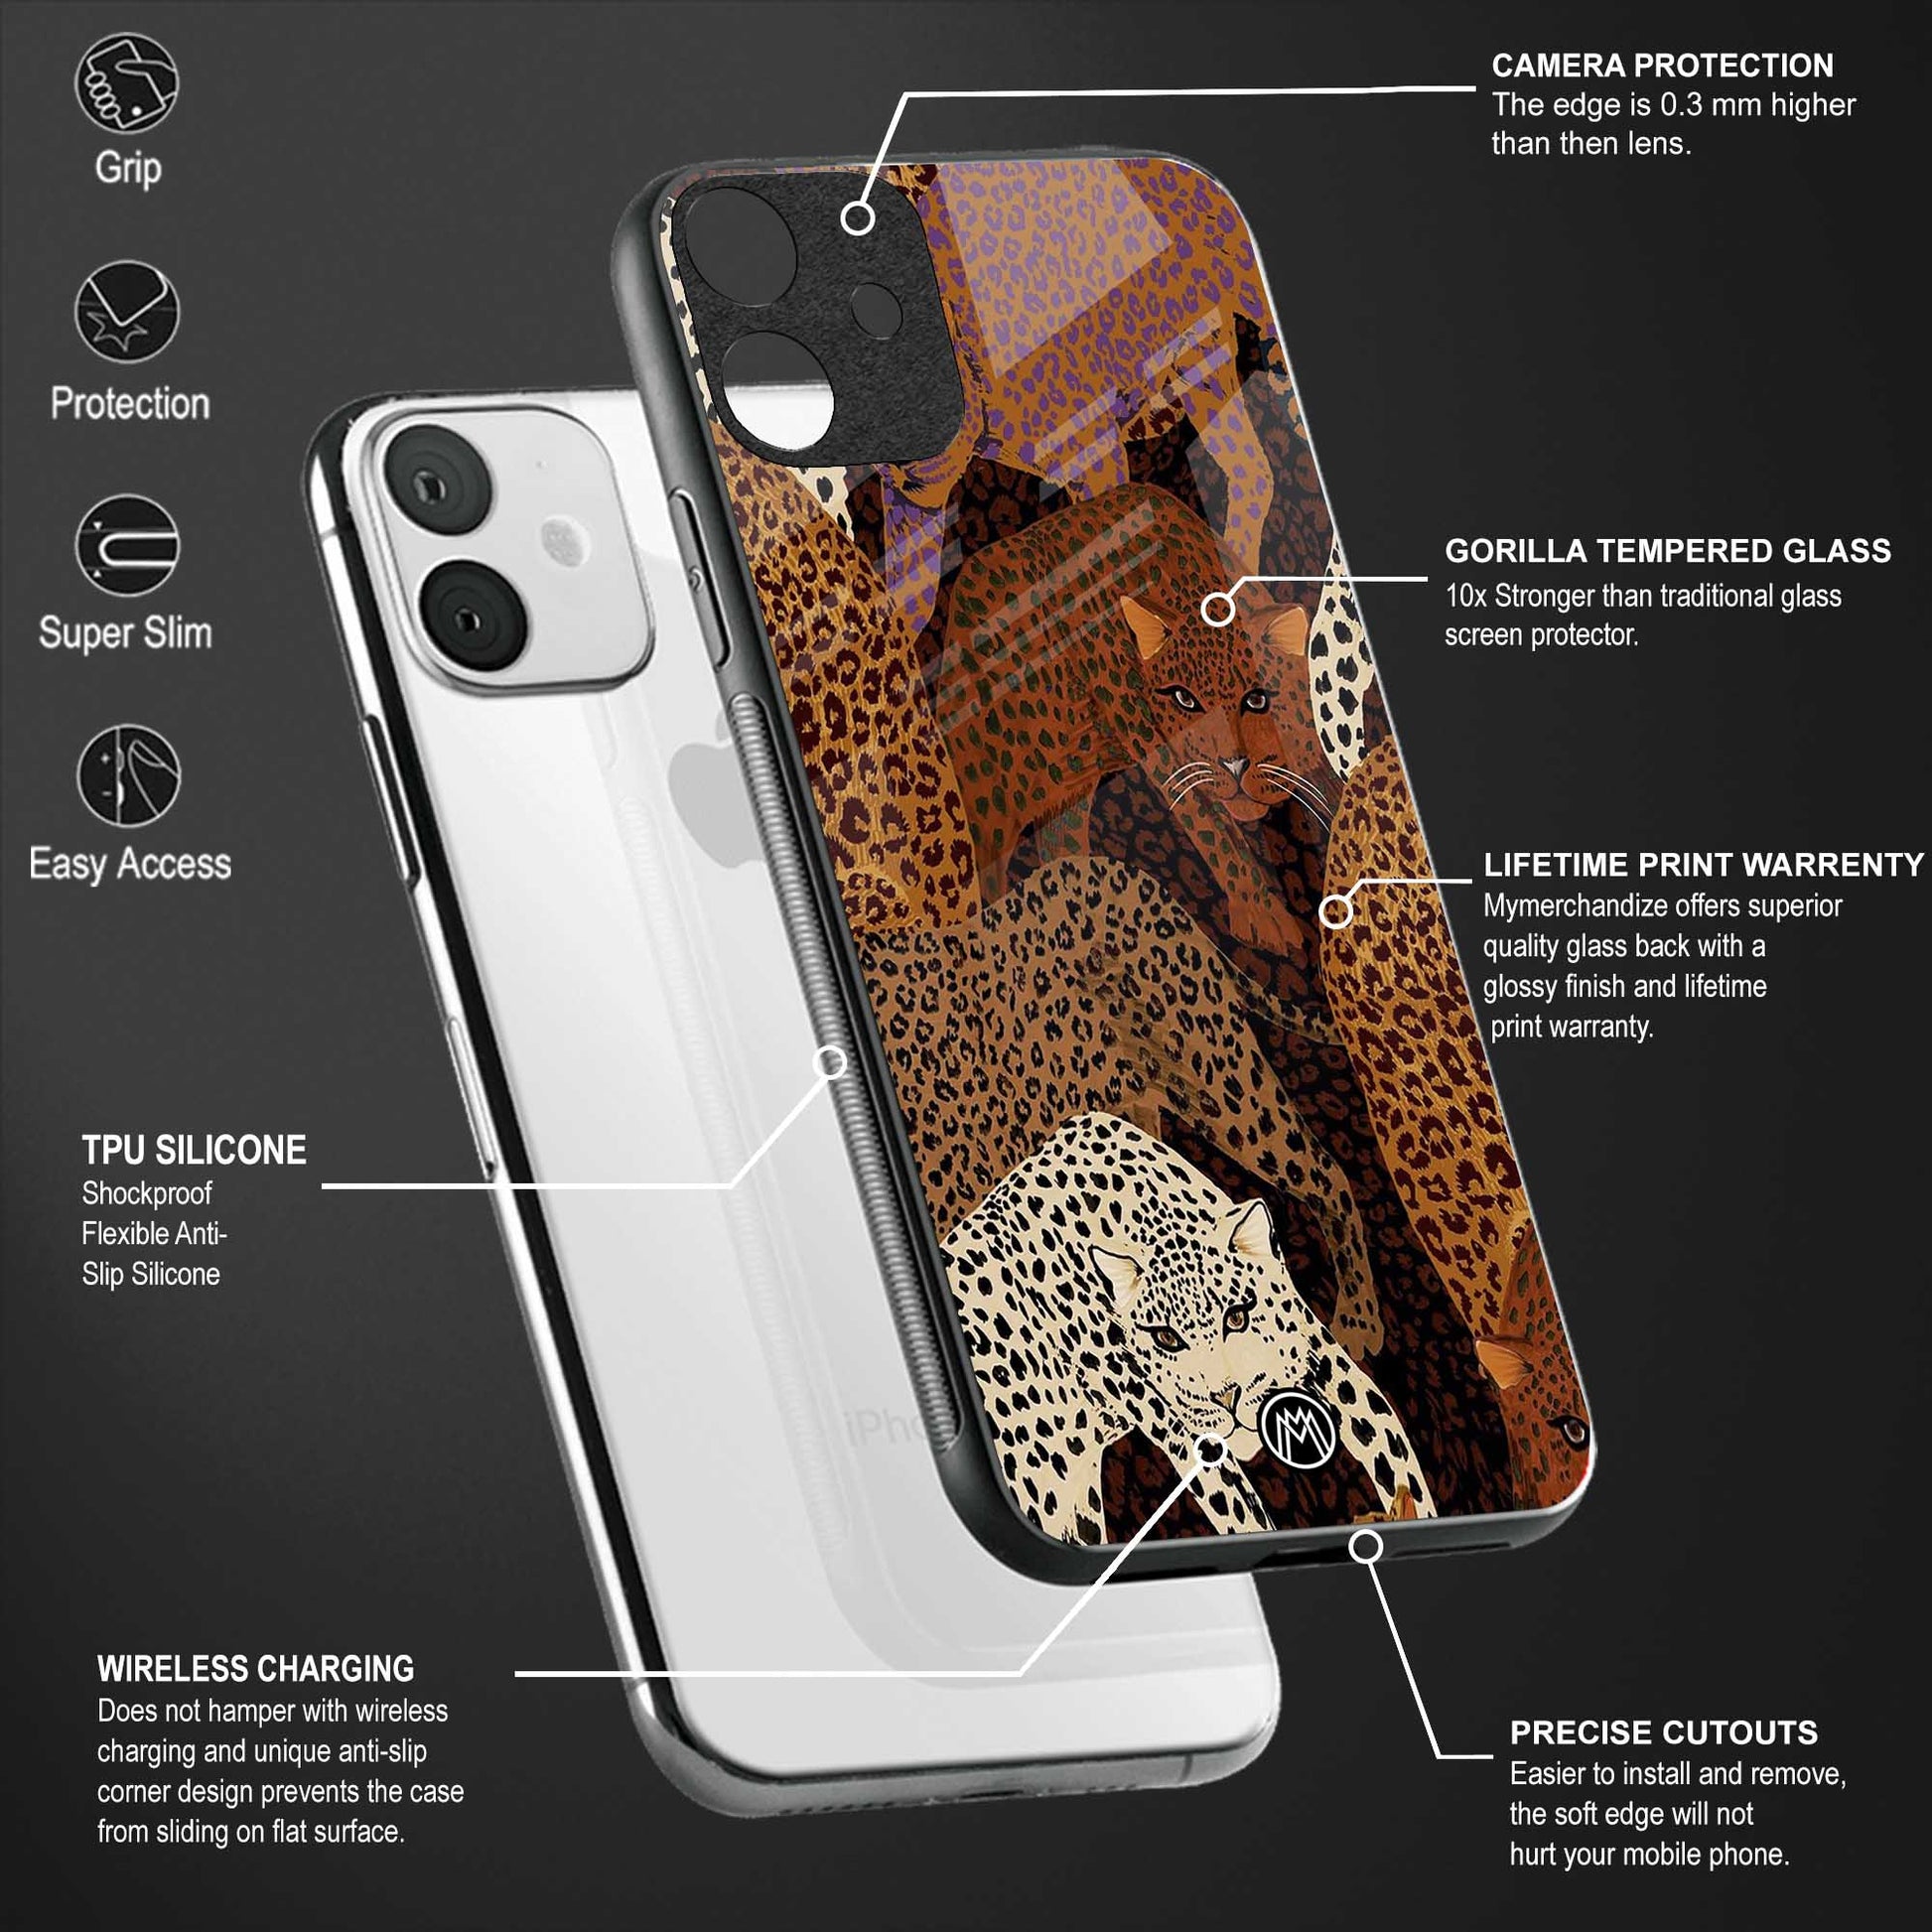 brown beasts back phone cover | glass case for vivo y16